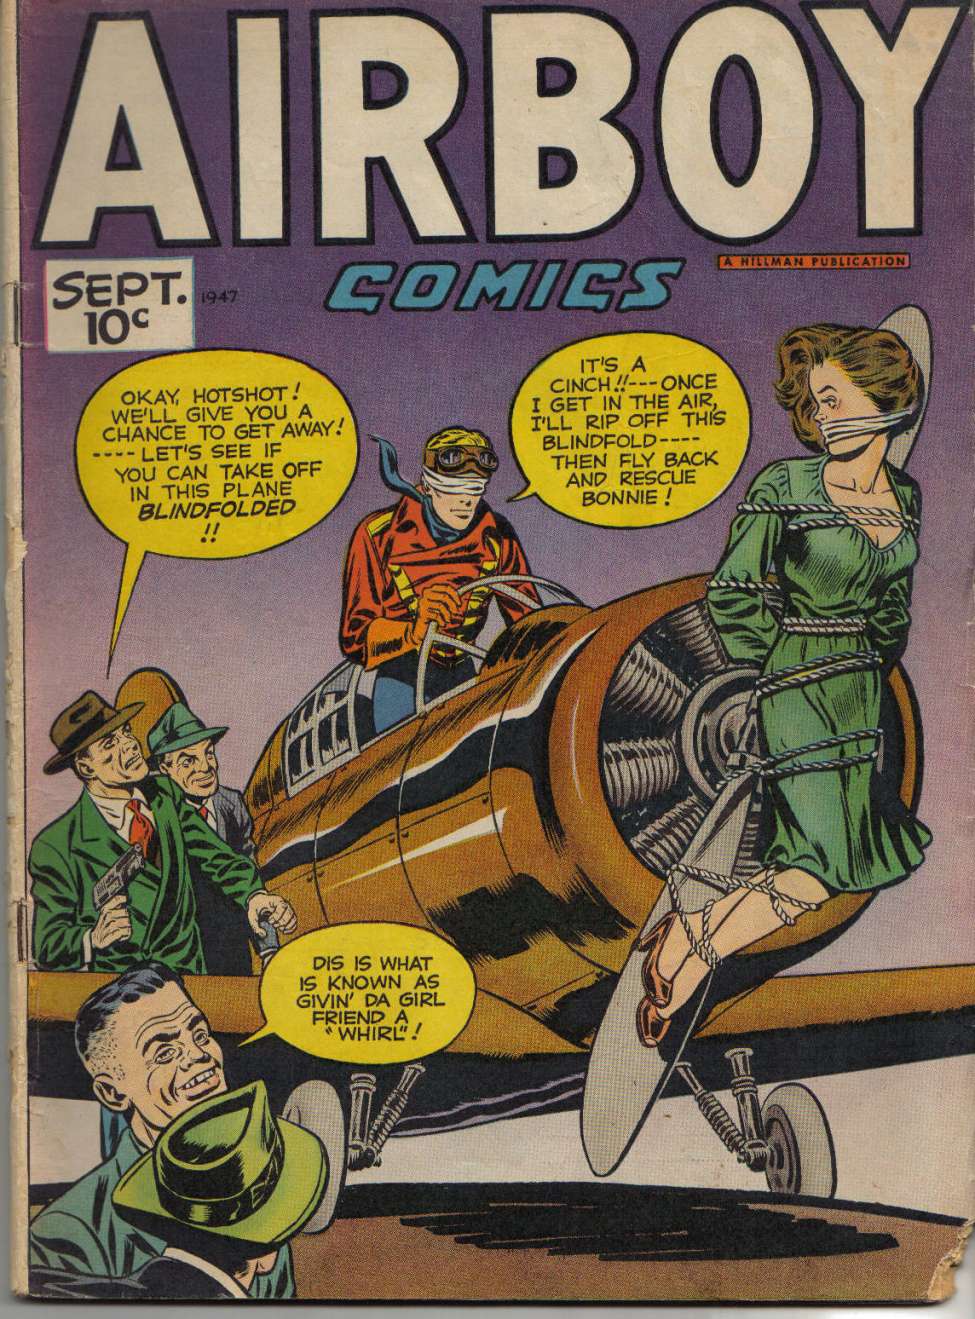 Book Cover For Airboy Comics v4 8